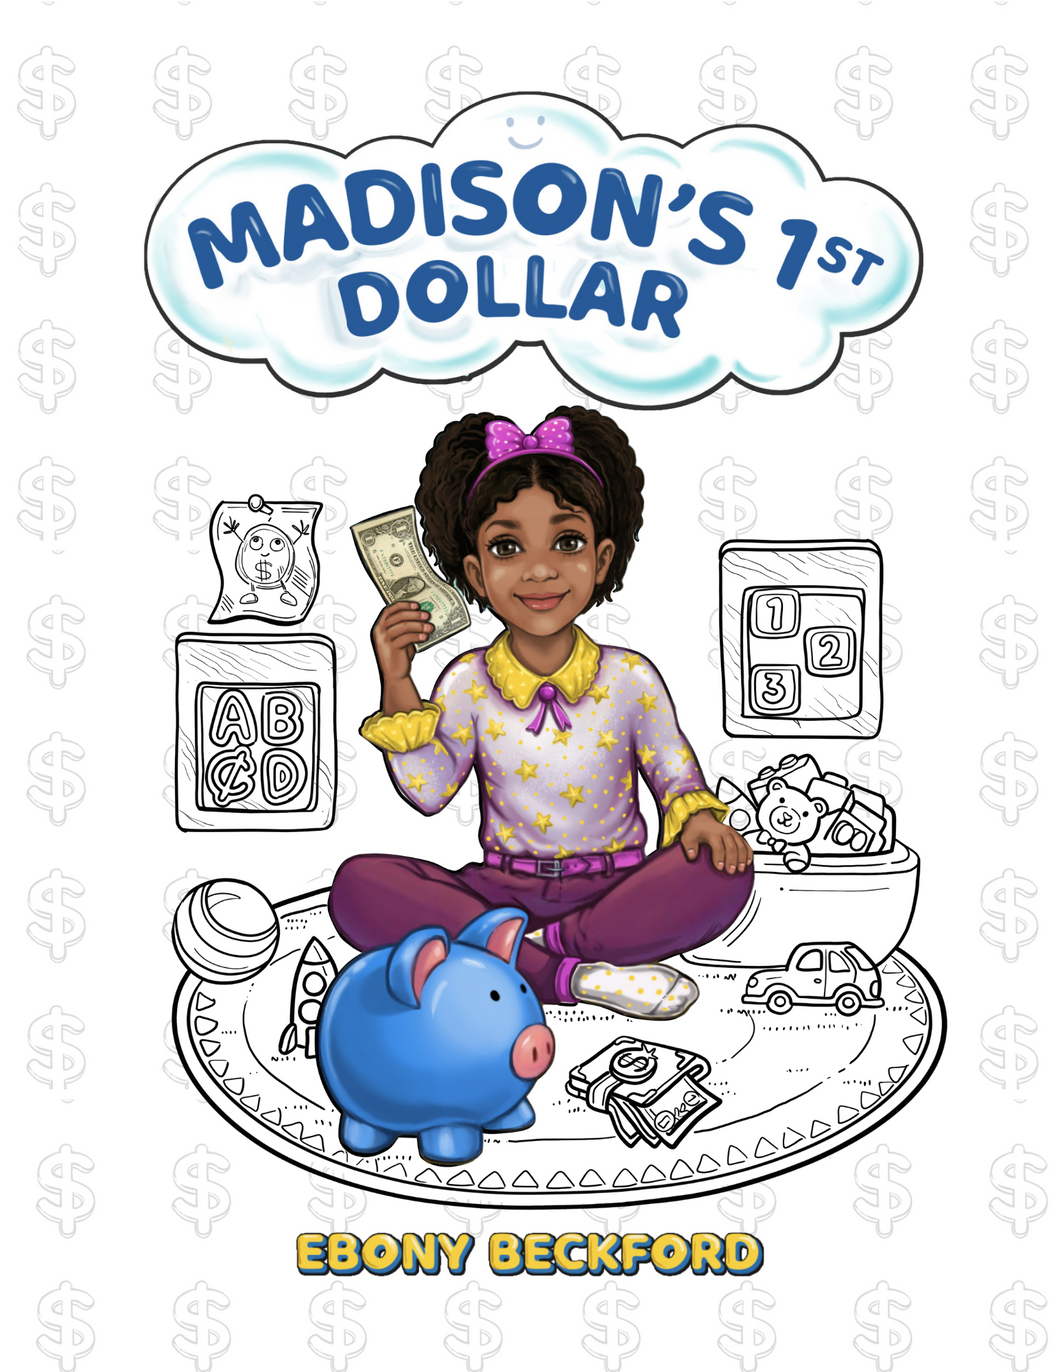 Madison's 1st Dollar - A Coloring Book About Money